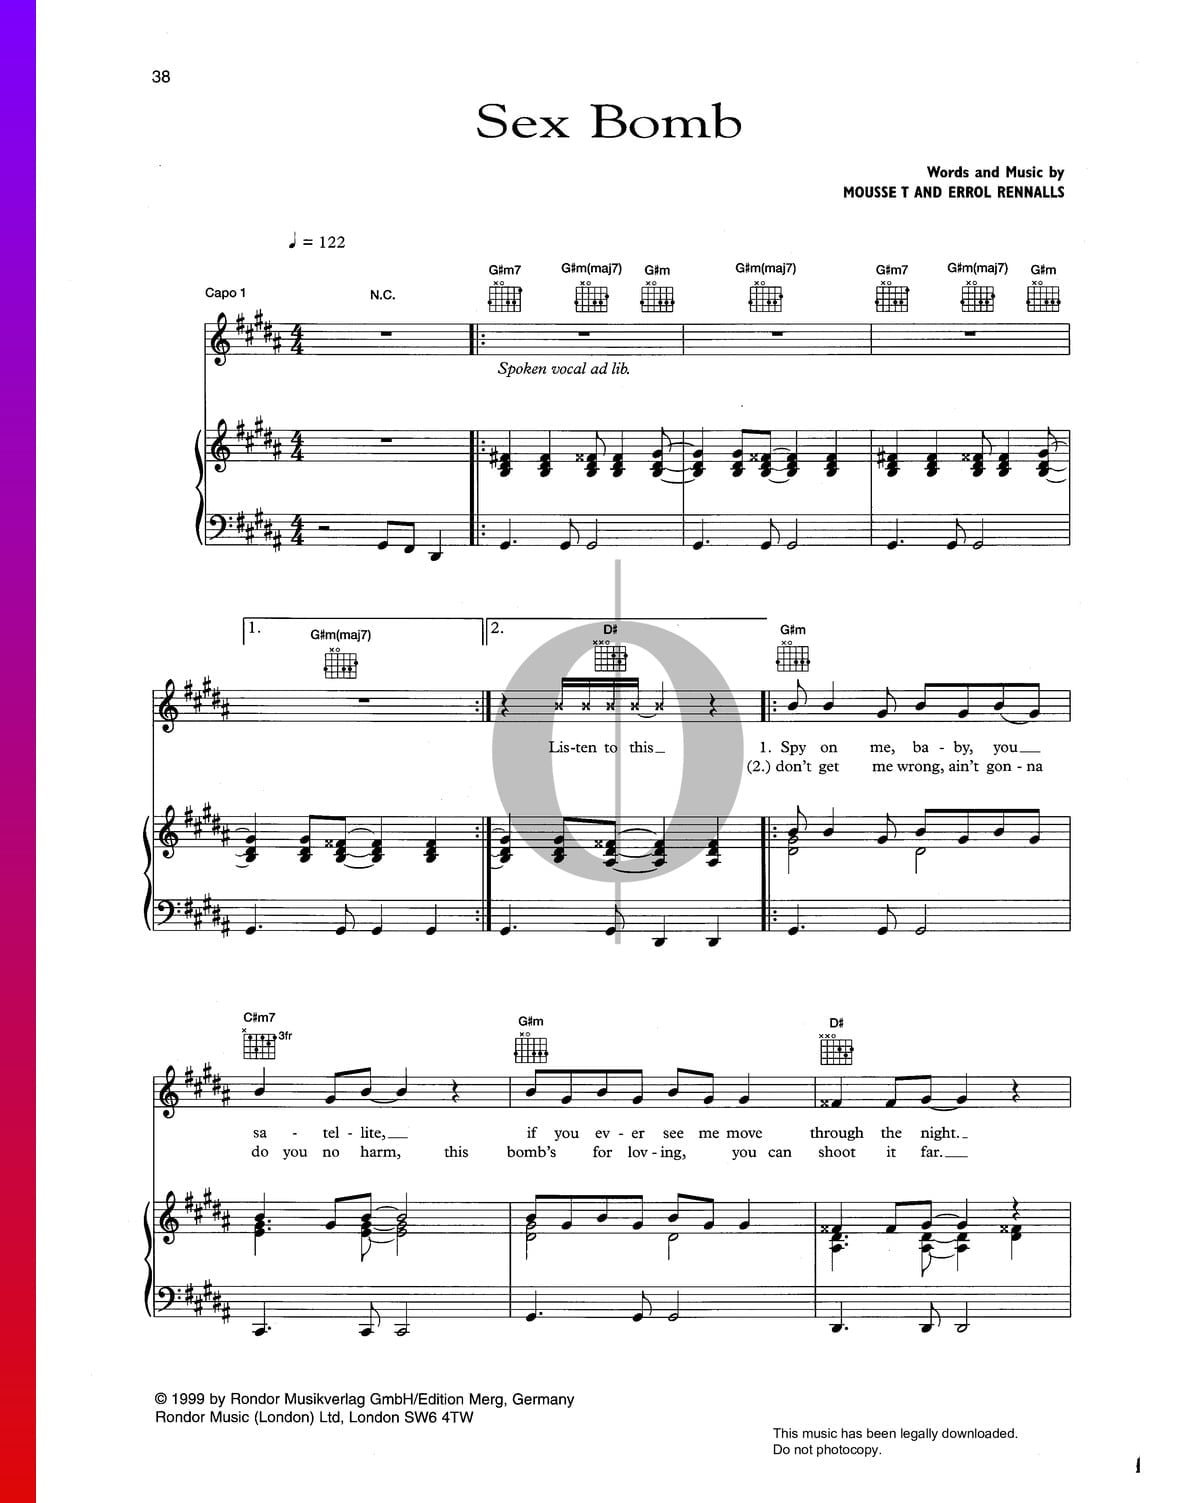 Sex Bomb Sheet Music Piano Guitar Voice Pdf Download And Streaming 